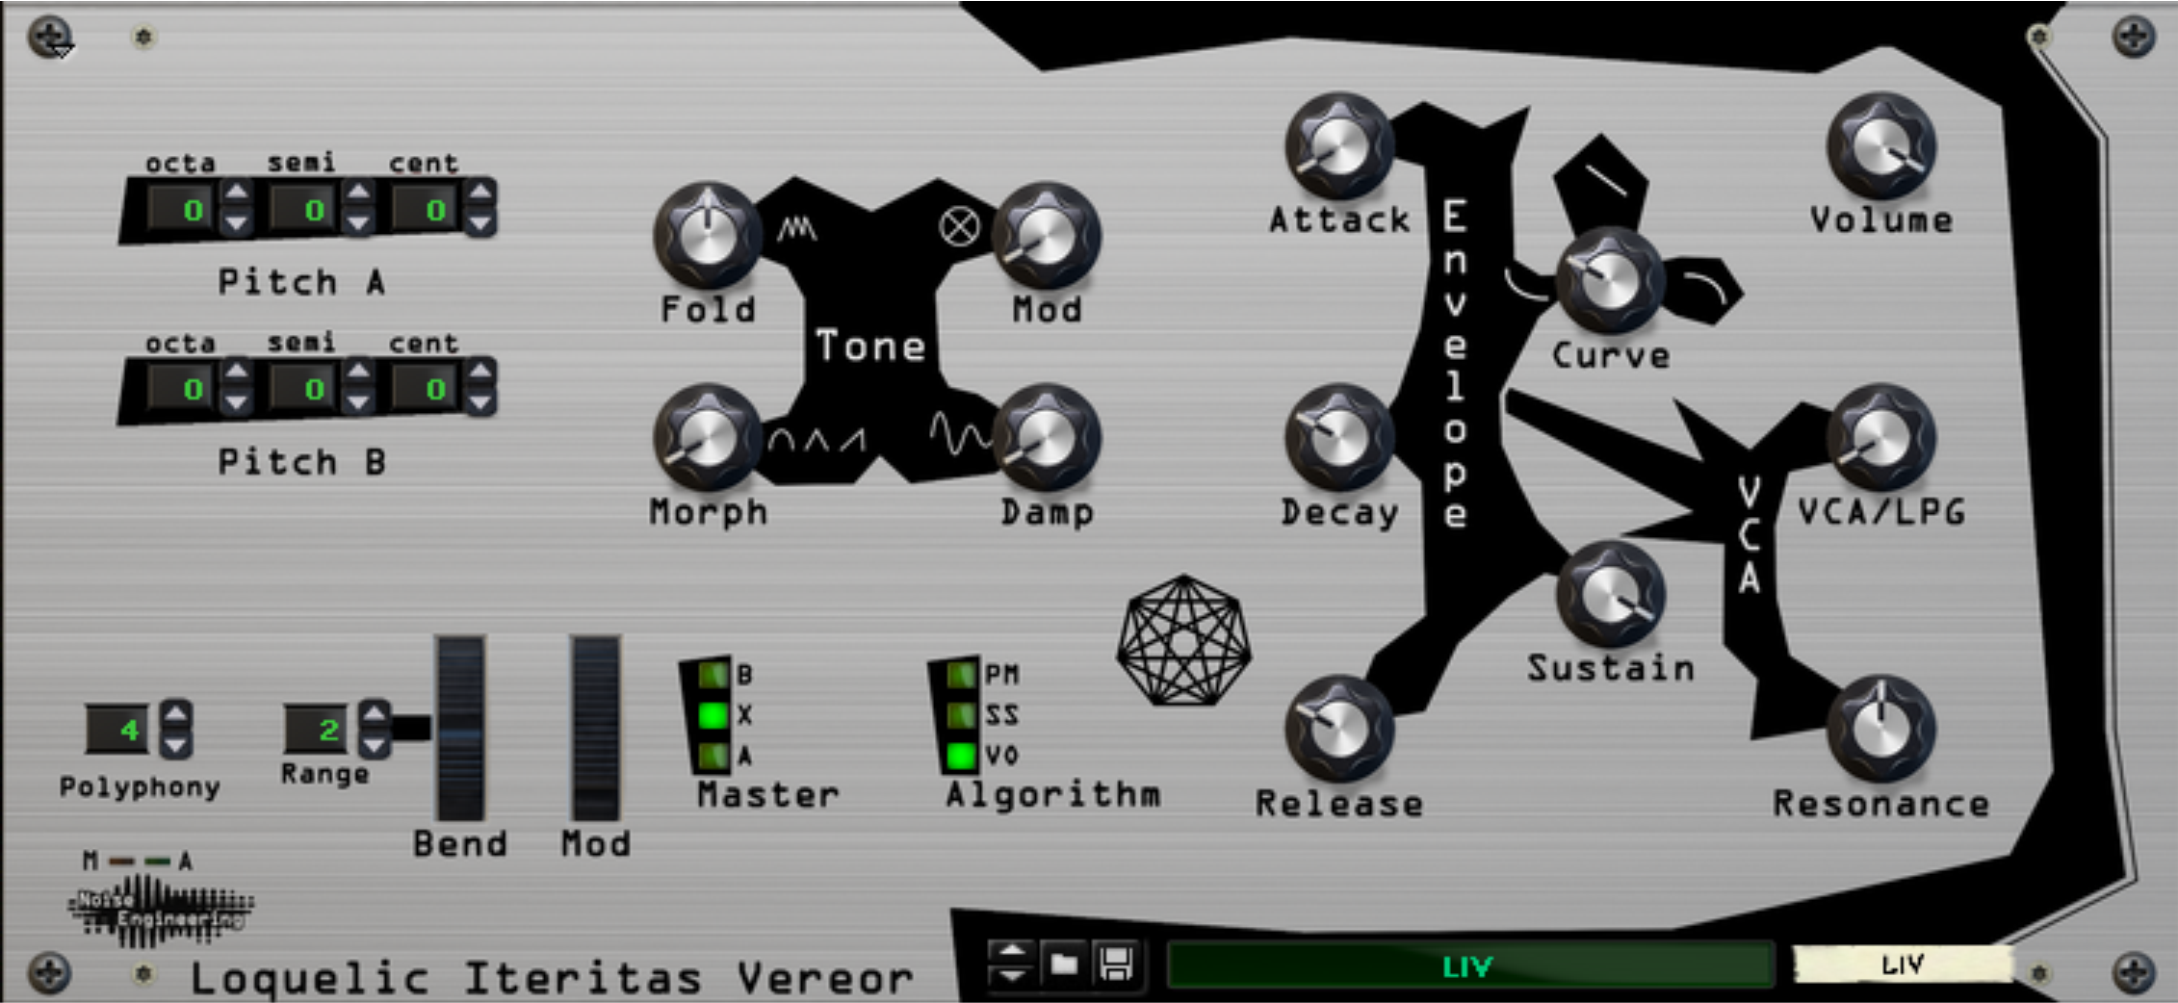 Picture of Loquelic Iteritas Vereor's front interface